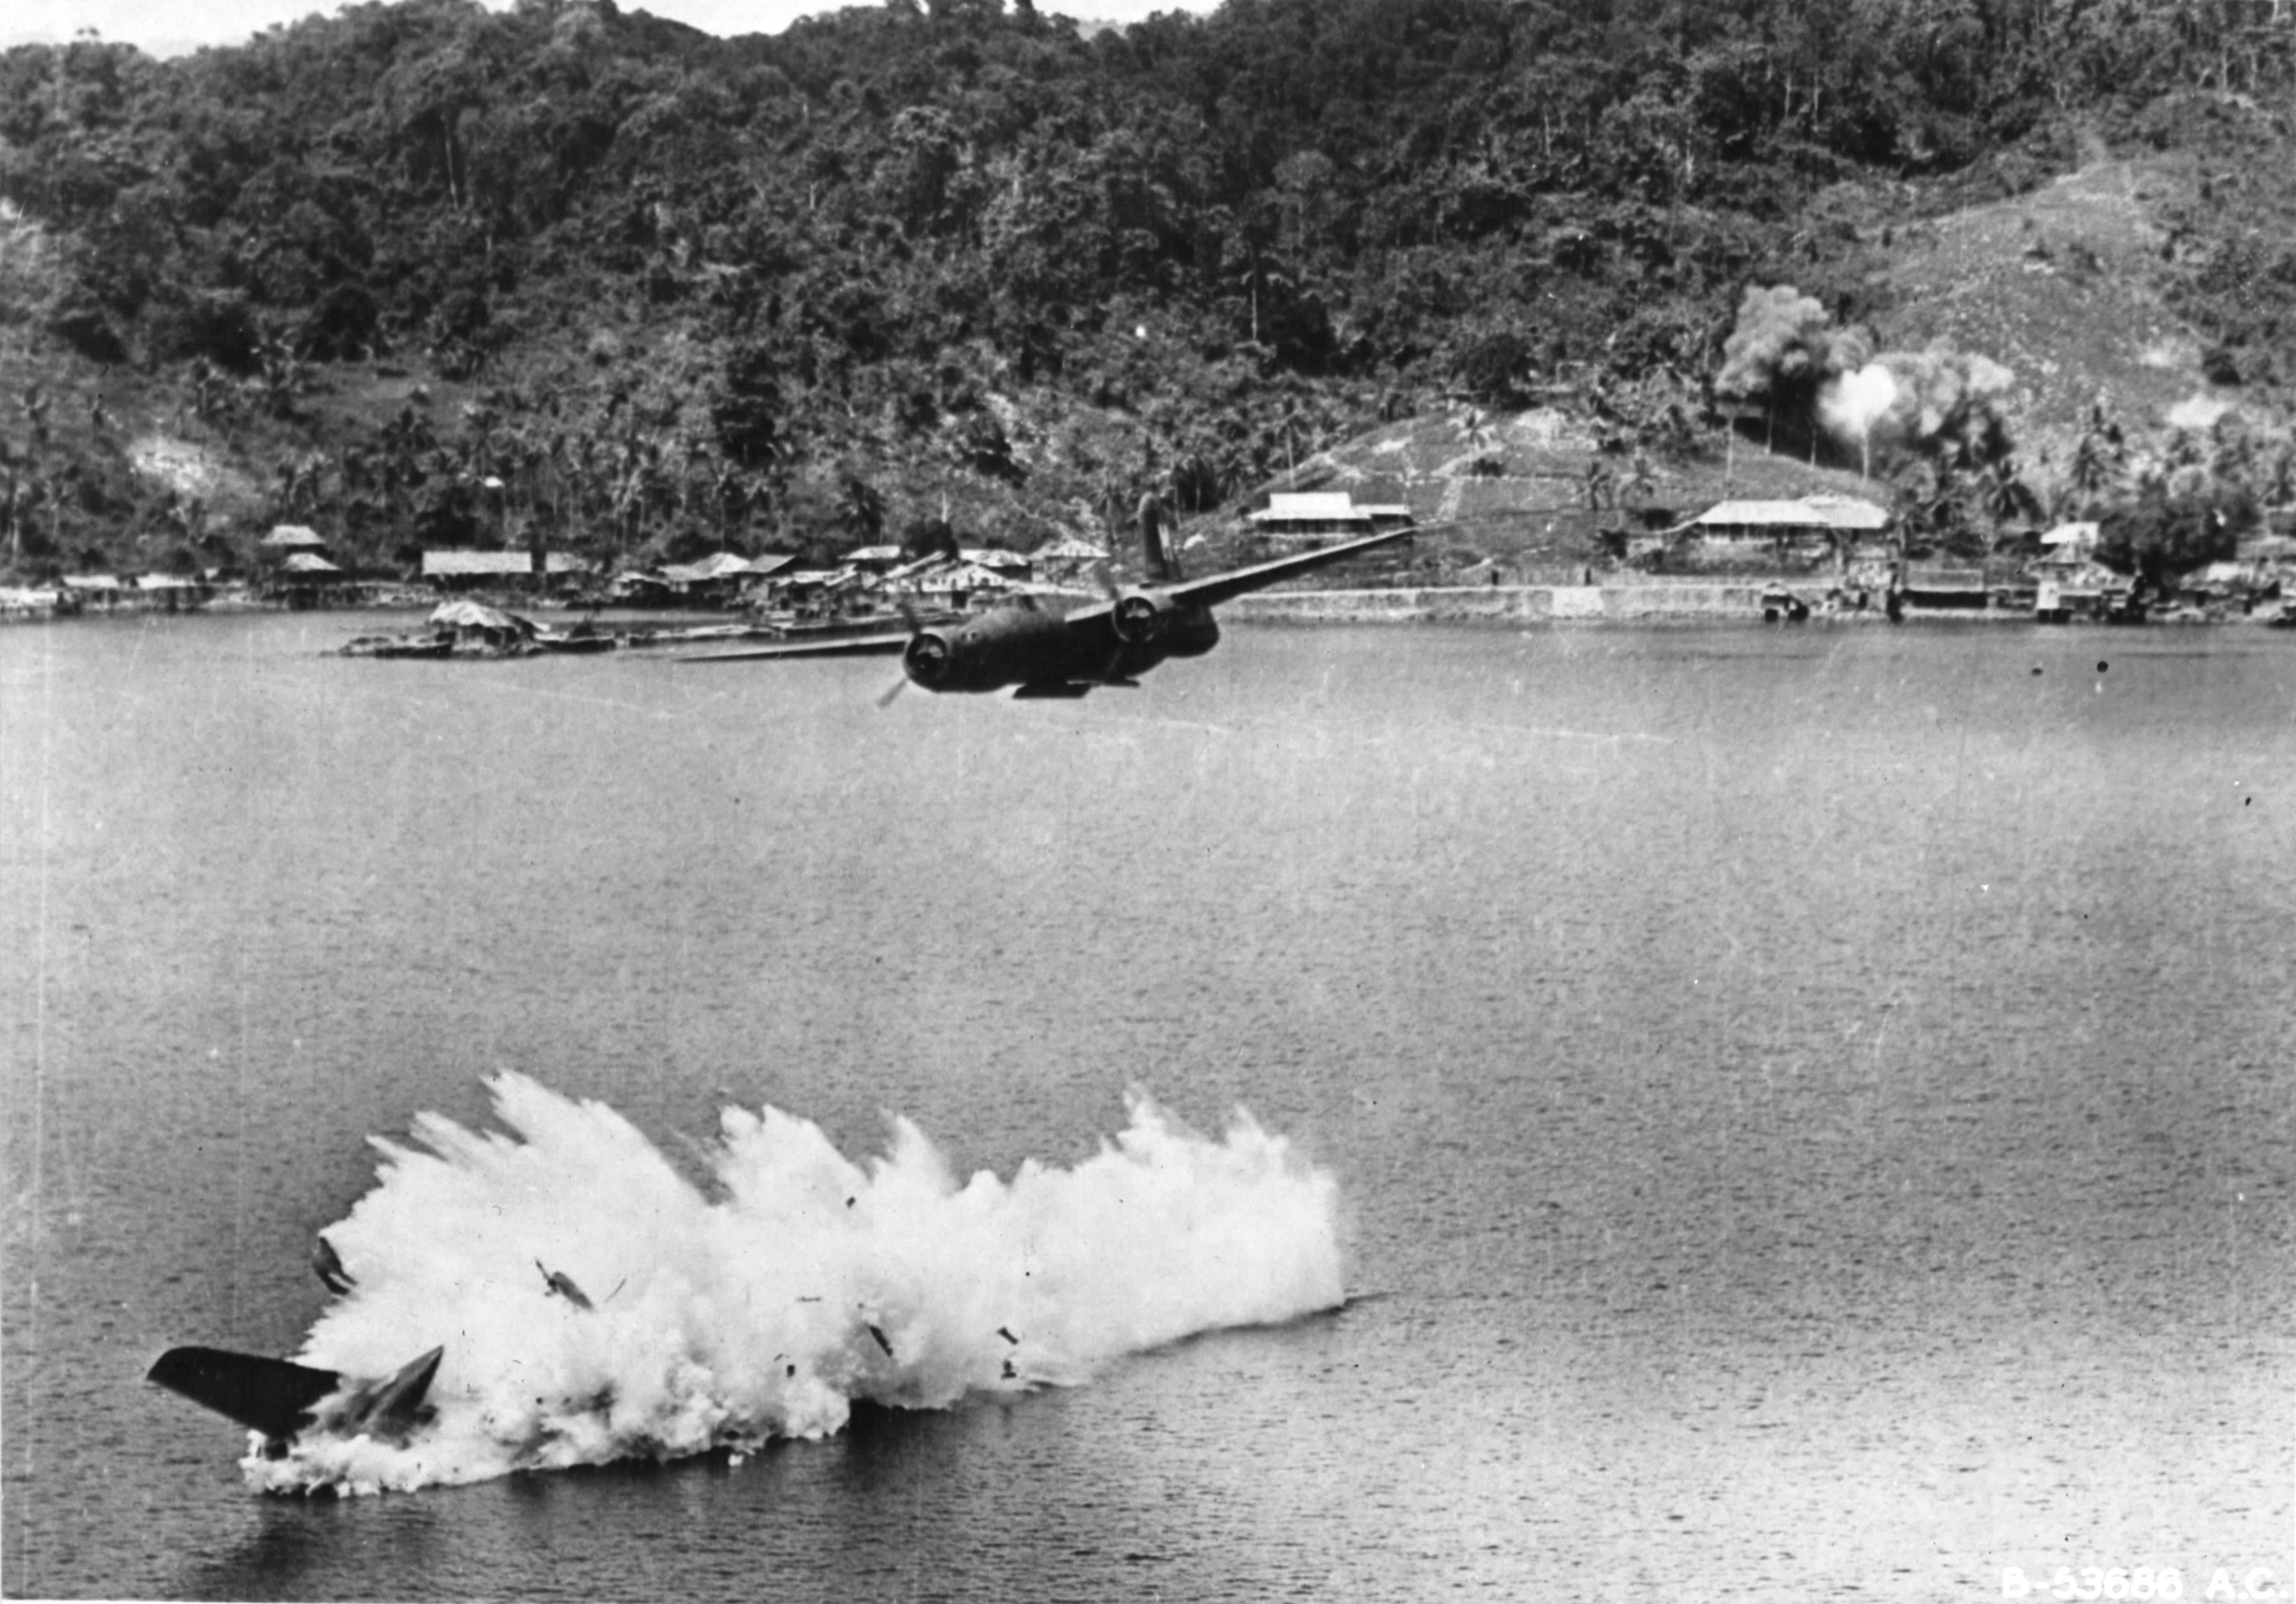 Douglas A-20G Havoc of the 387th Bomb Squadron crashing into the water after being shot down by anti-aircraft fire during an attack on Kokas, western New Guinea, 22 Jul 1944. All crewmembers were killed. Photo 3 of 4.